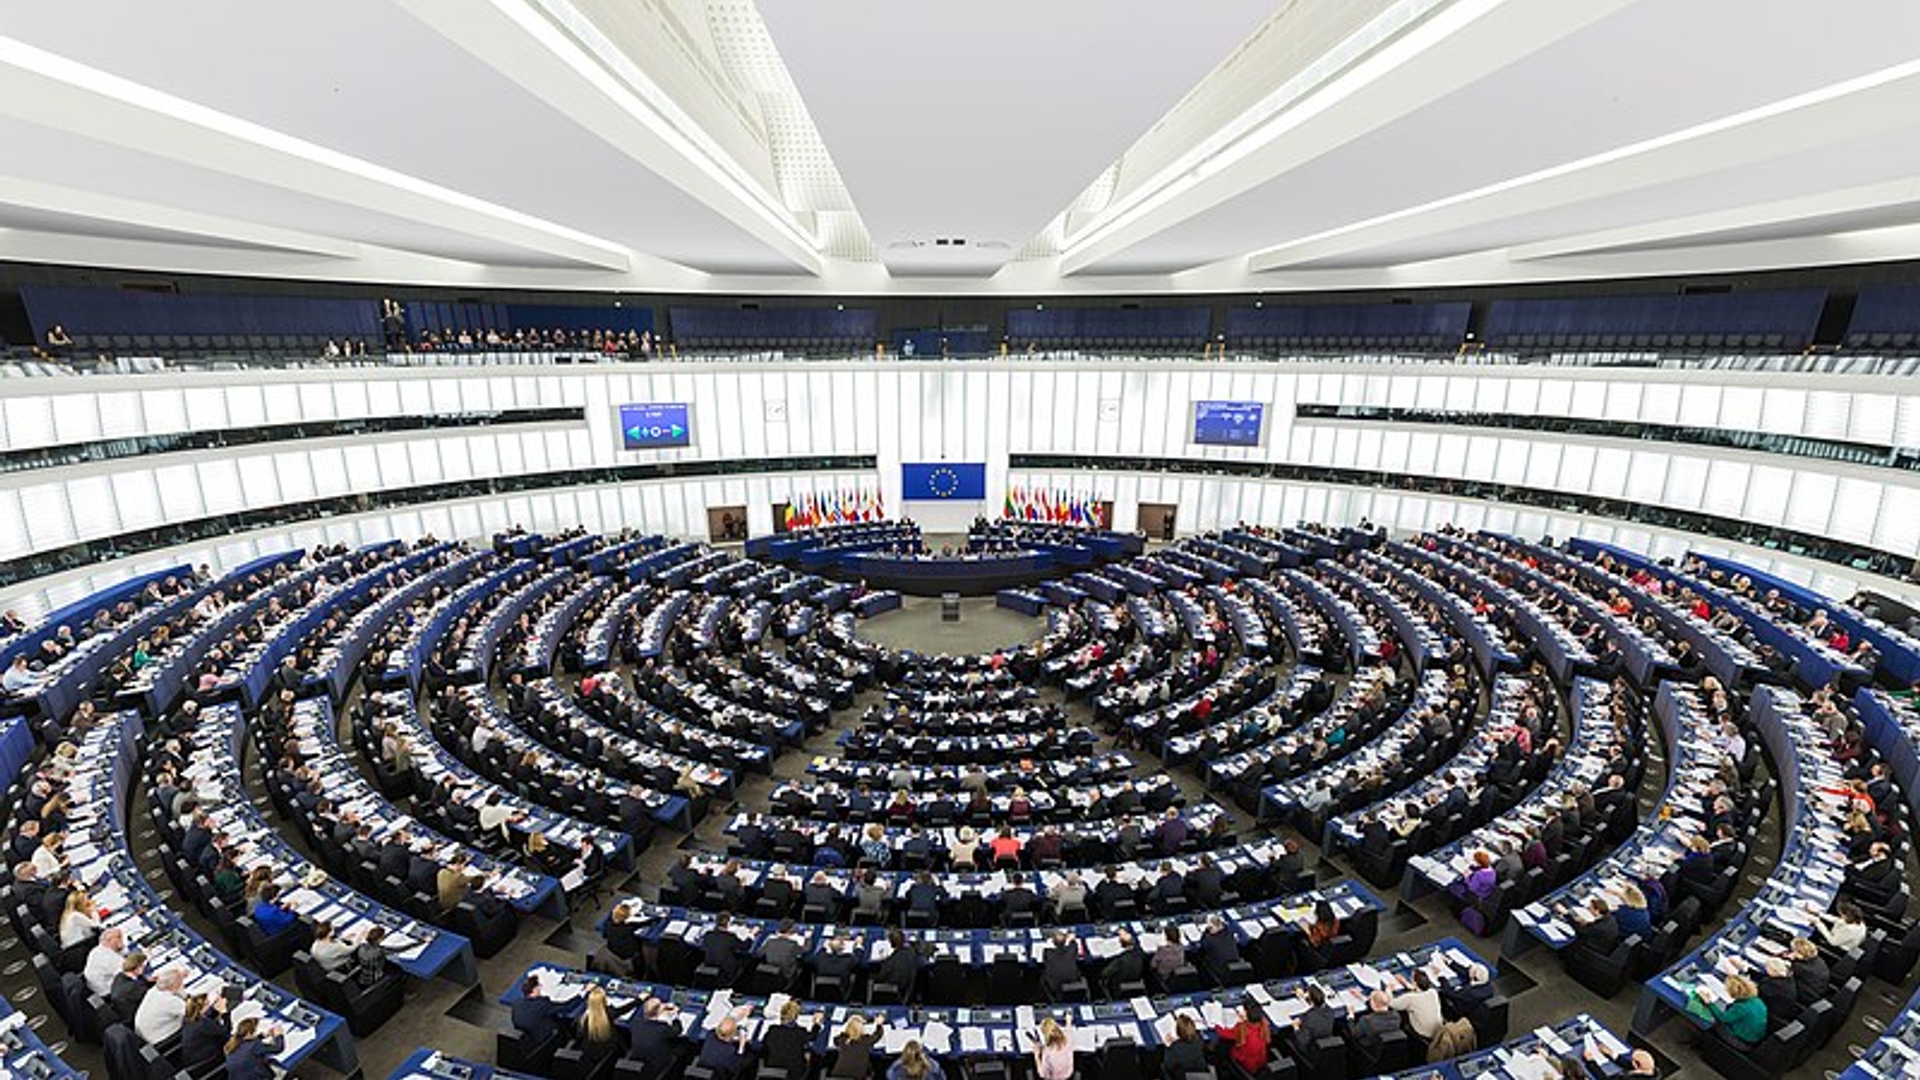 800px-European_Parliament_Strasbourg_Hemicycle_-_Diliff